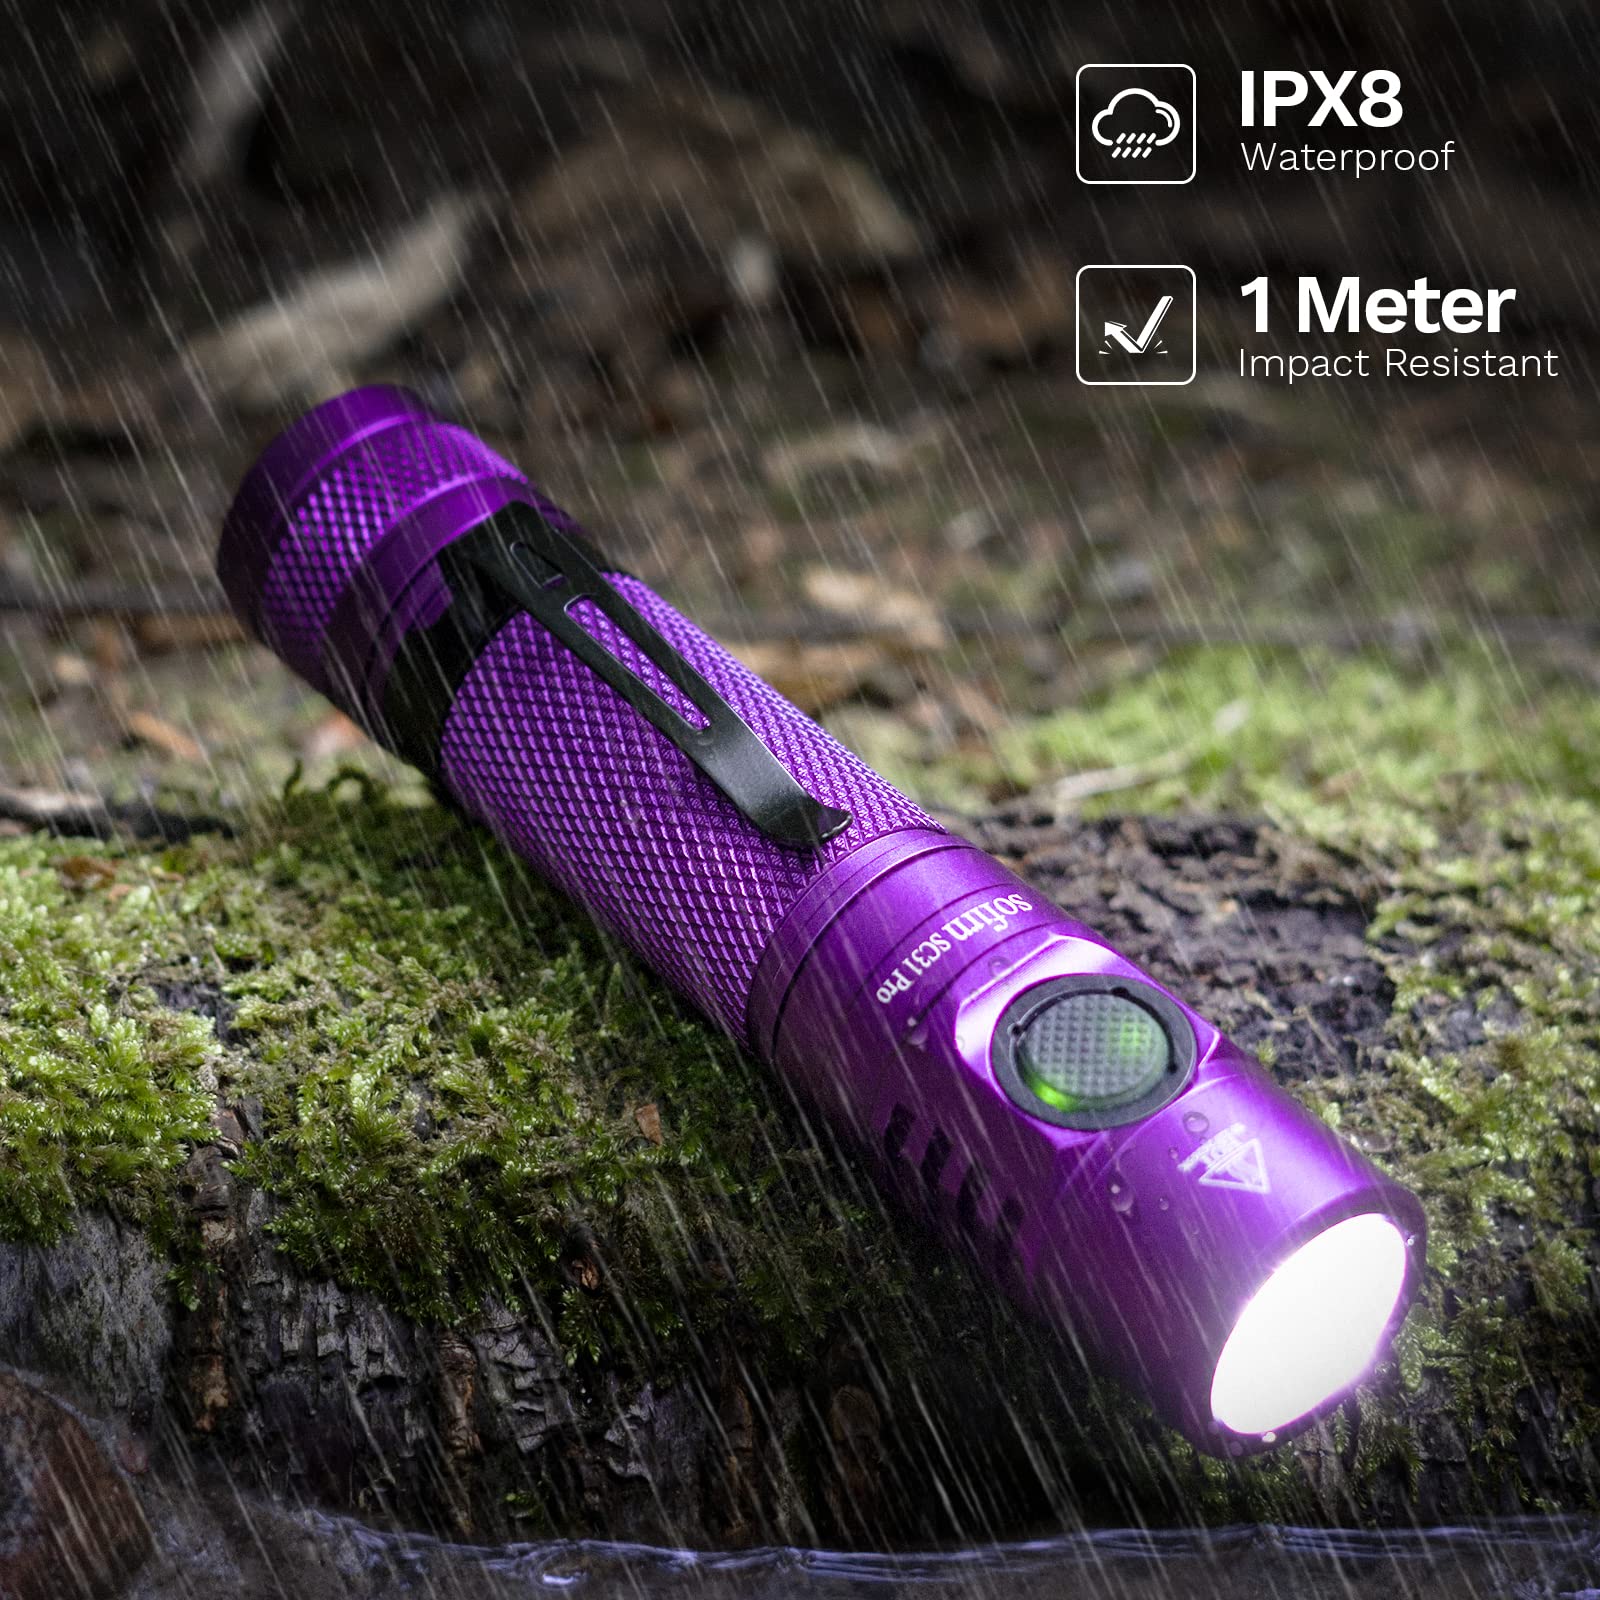 CSTEBOKE Small Flashlight Rechargeable, 2000 Lumens EDC Flashlight with Super Bright SST40 6500K LED, Anduril 2 UI, Portable Light, Gift for Woman Friend, Girlfriend, Wife（Purple